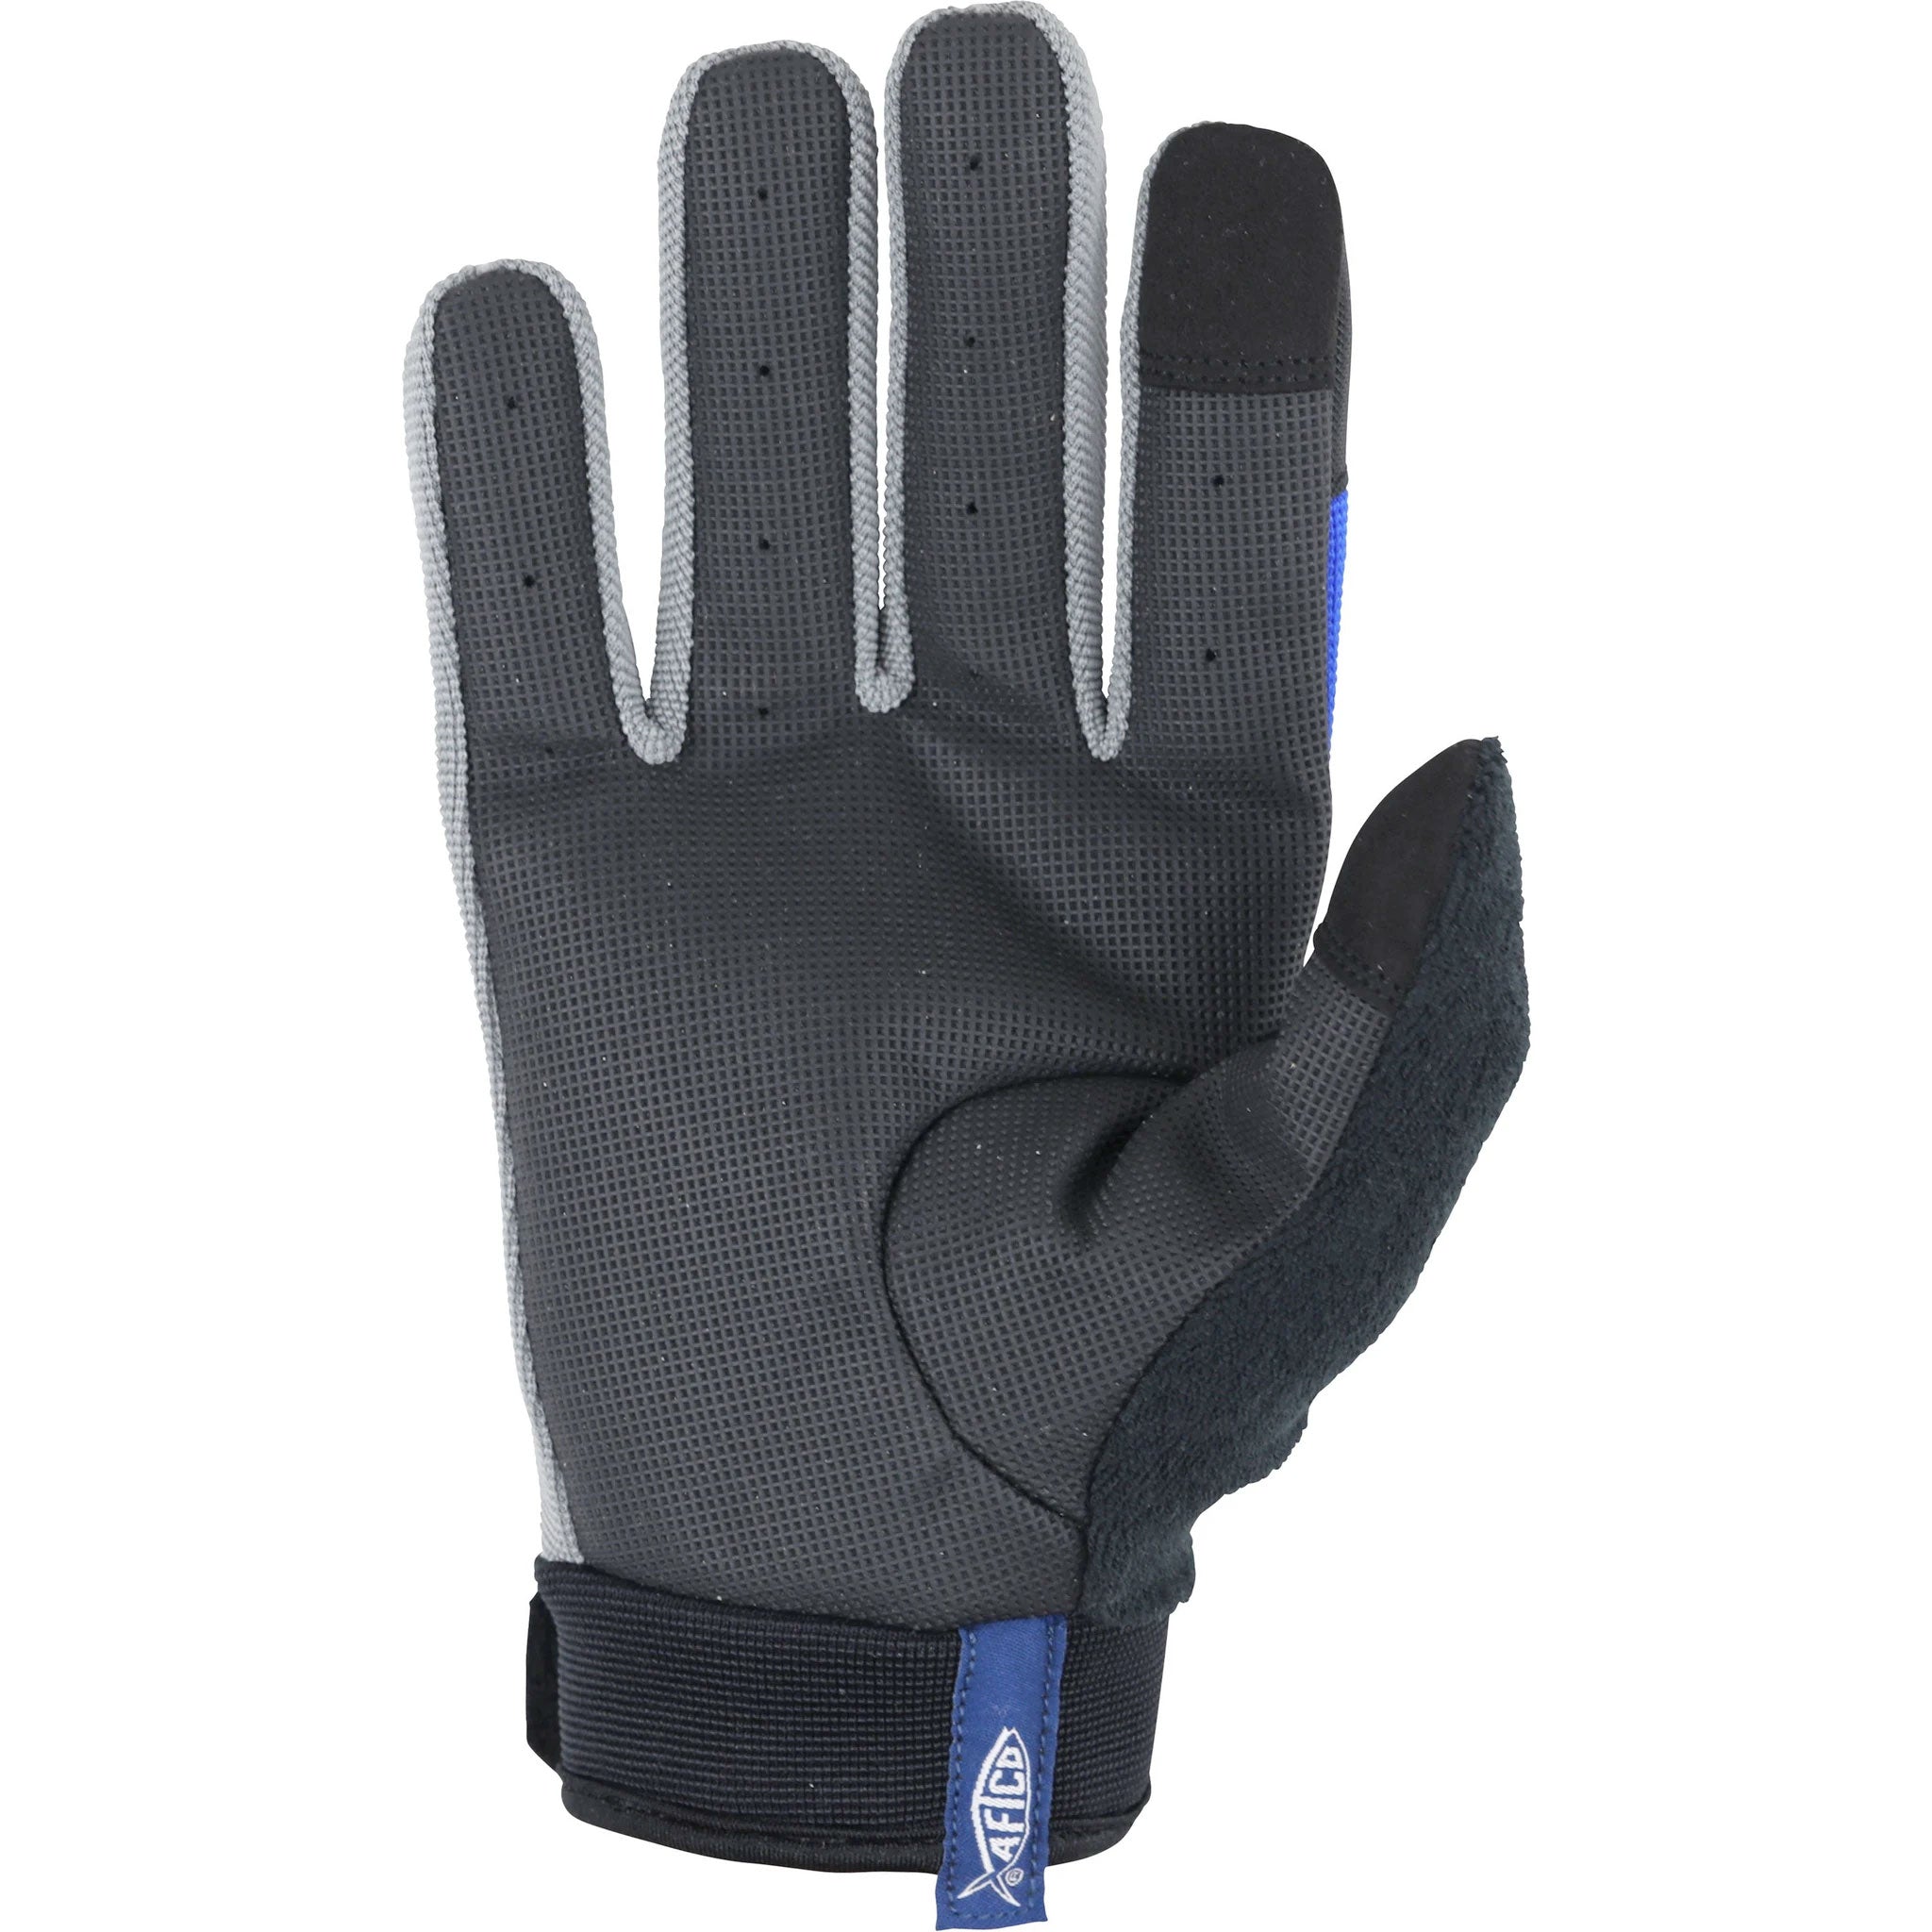 Utility All-Purpose Fishing Gloves